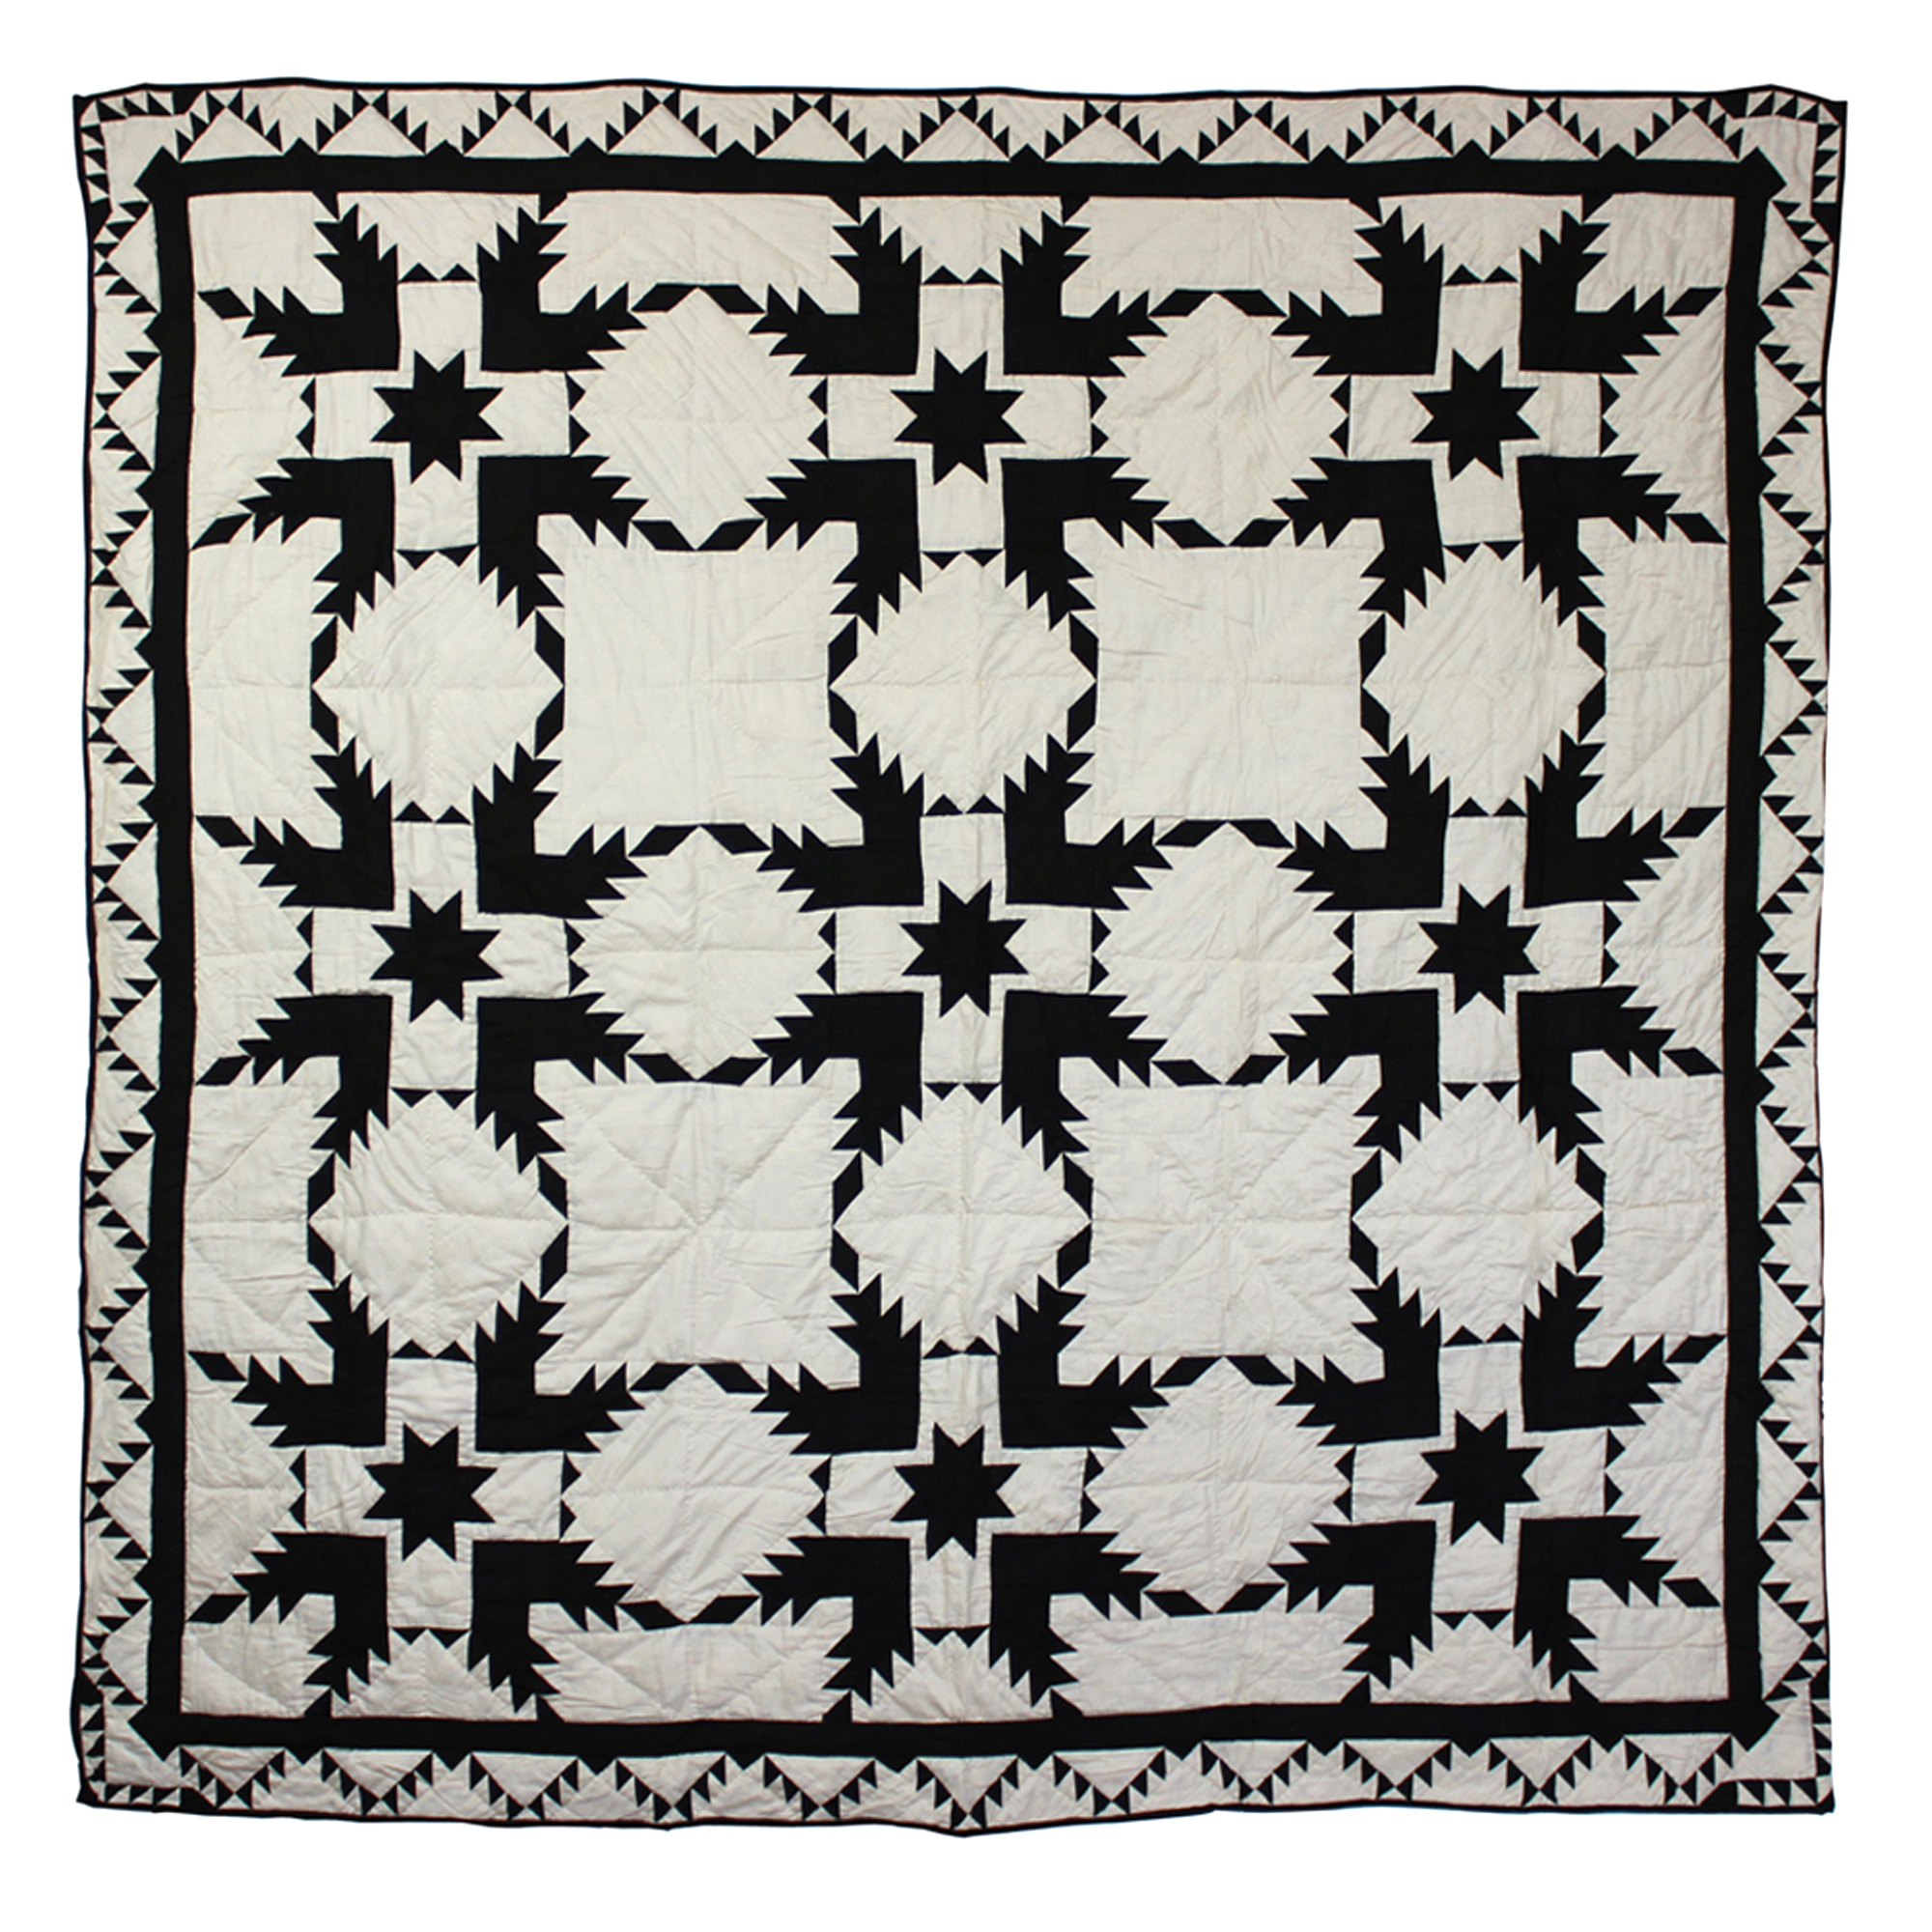 Coal Feathered Star Throw 50"W x 60"L